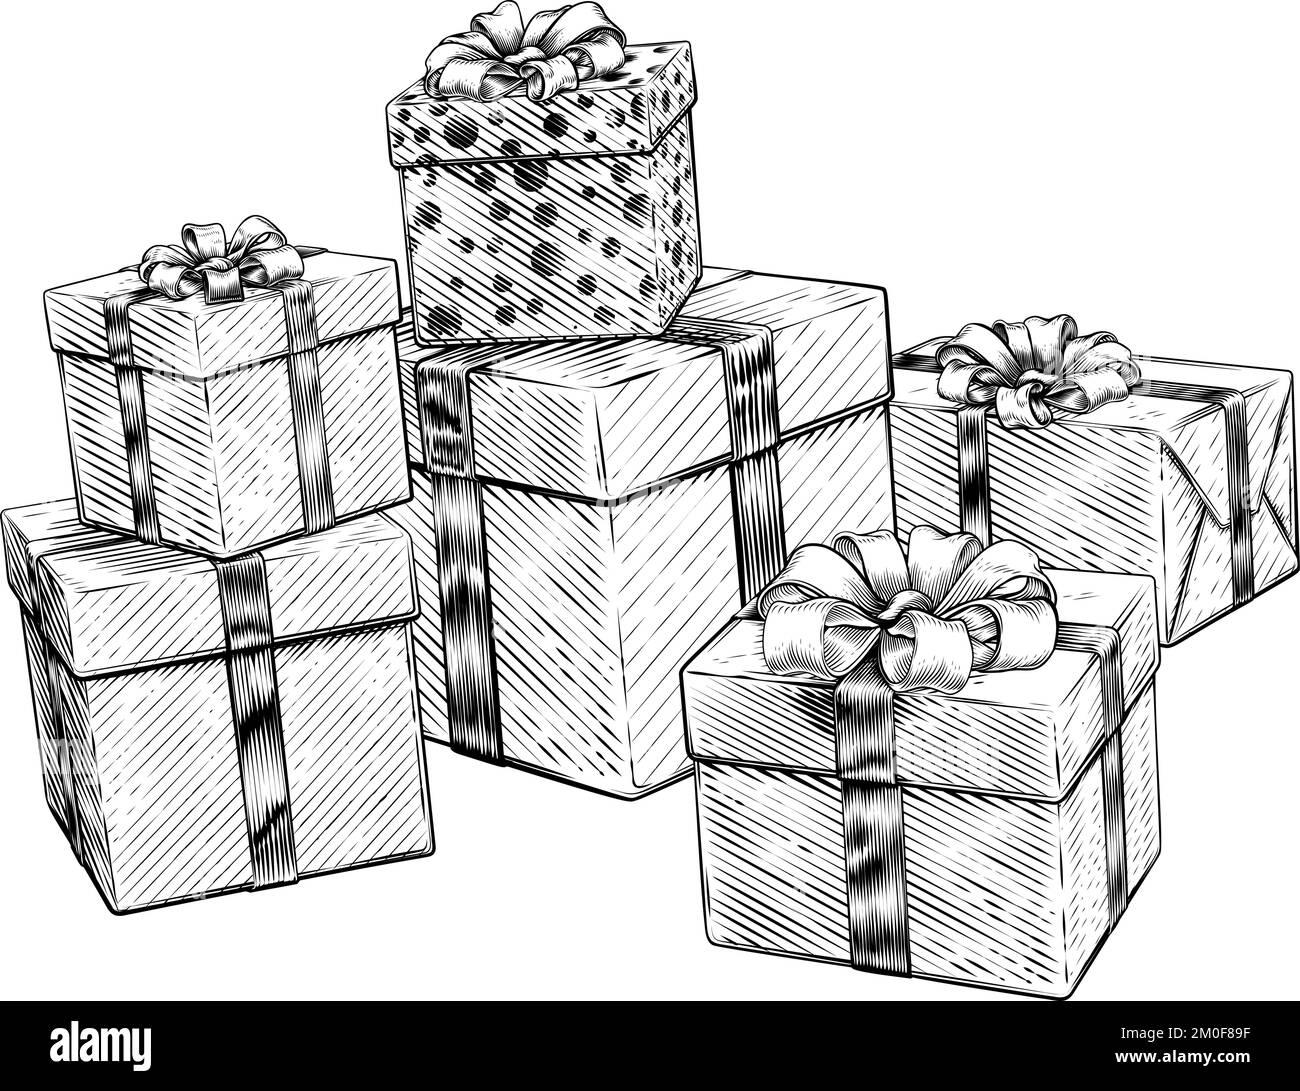 Christmas Gifts Birthday Presents Boxes Pile Stack Stock Vector